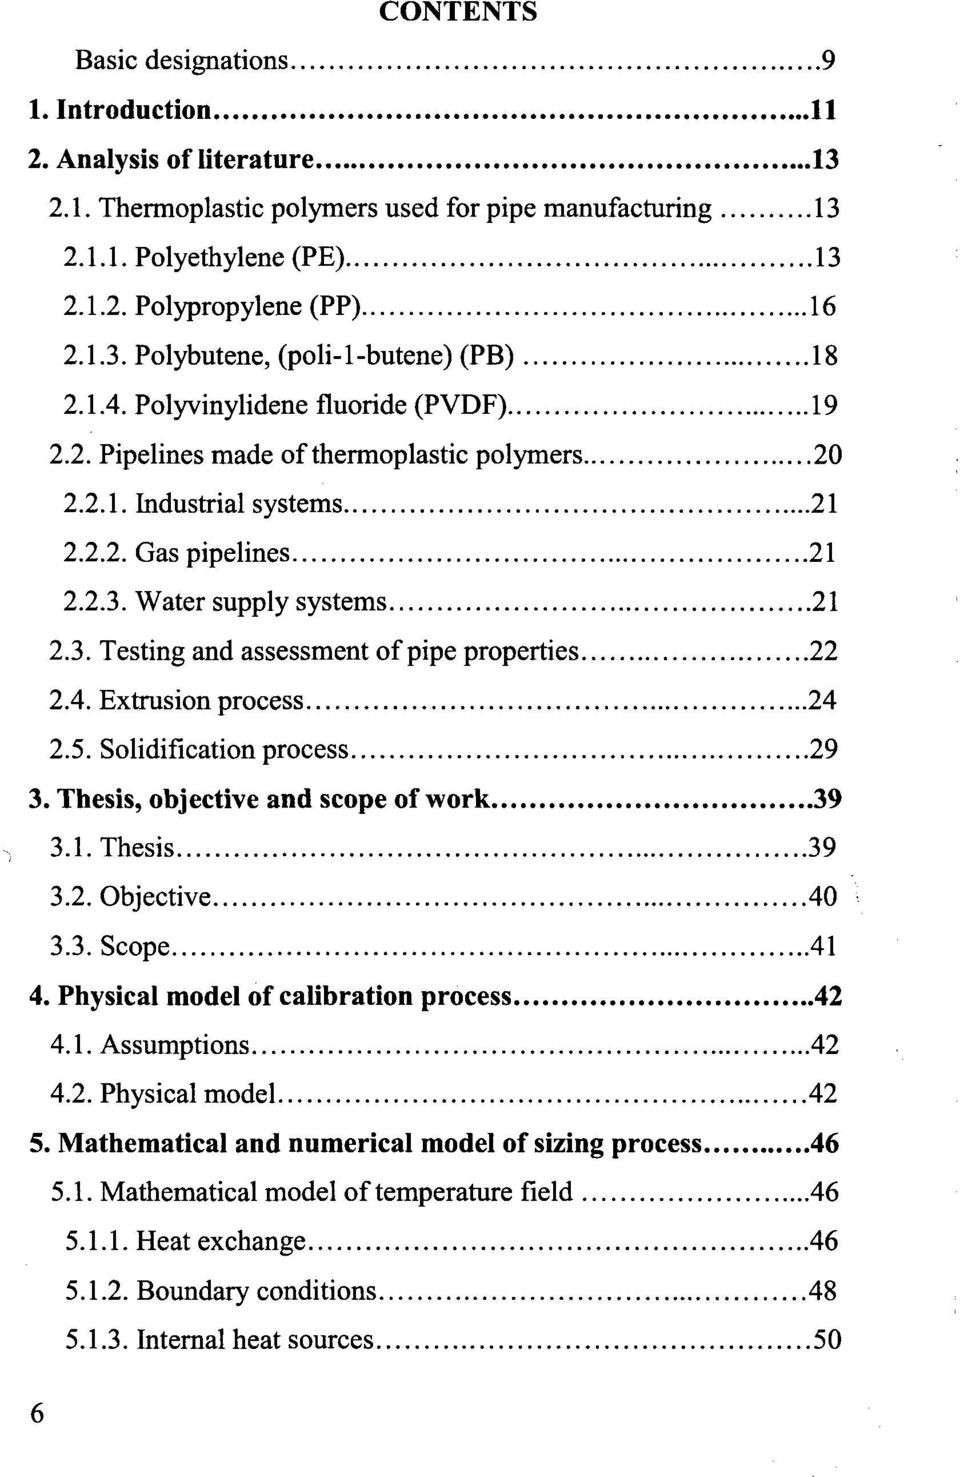 4. Extrusion process 24 2.5. Solidification process 29 3. Thesis, objective and scope of work 39 3.1.Thesis 39 3.2. Objective 40 3.3. Scope 41 4. Physical model of calibration process 42 4.1. Assumptions 42 4.